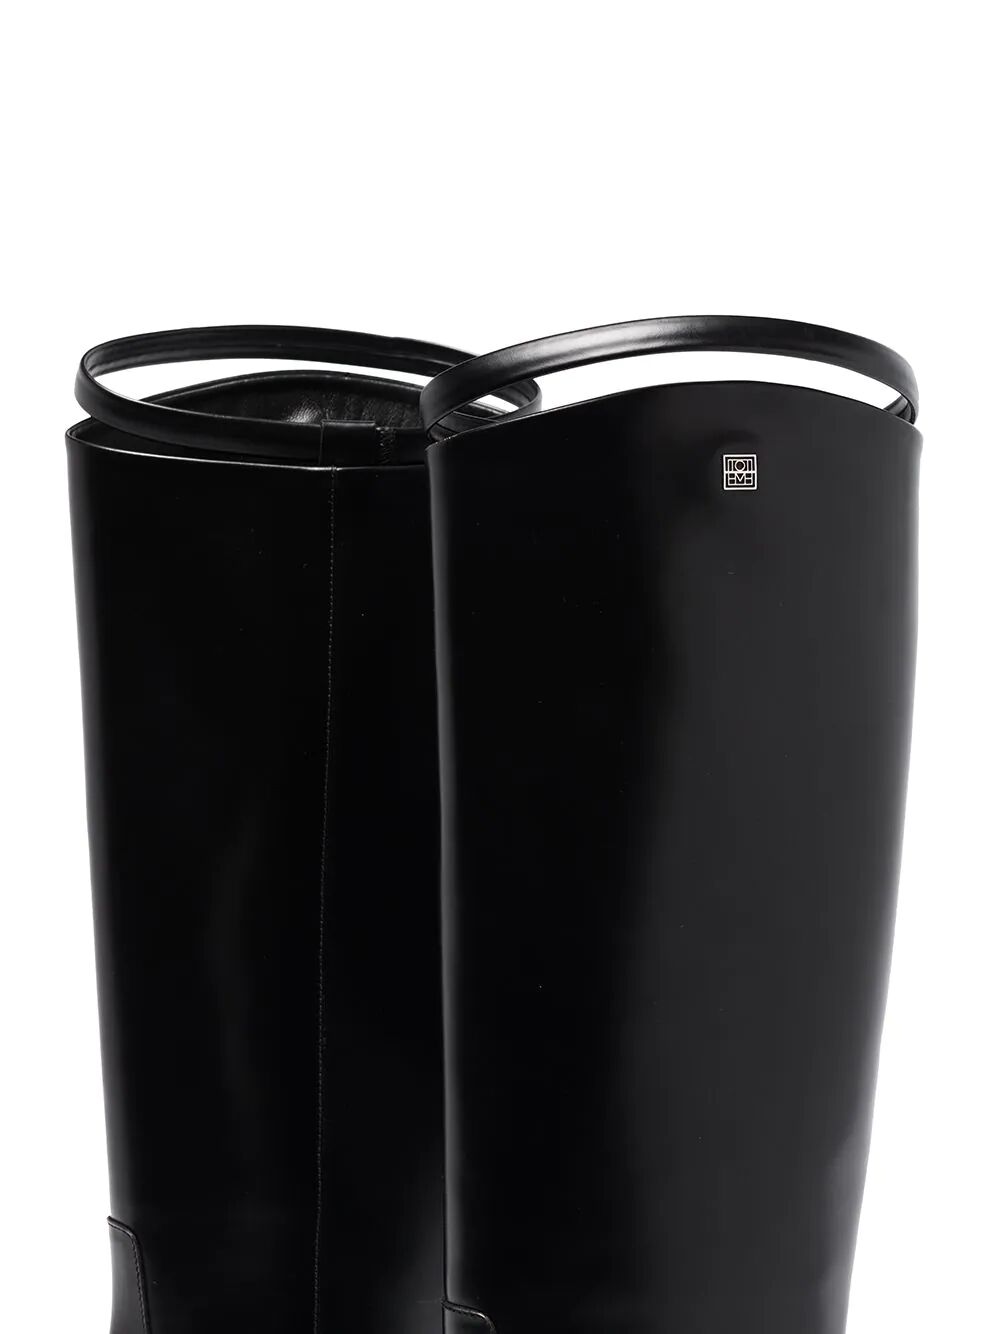 TOTEME-The Riding Boot-211901825 BLACK 200